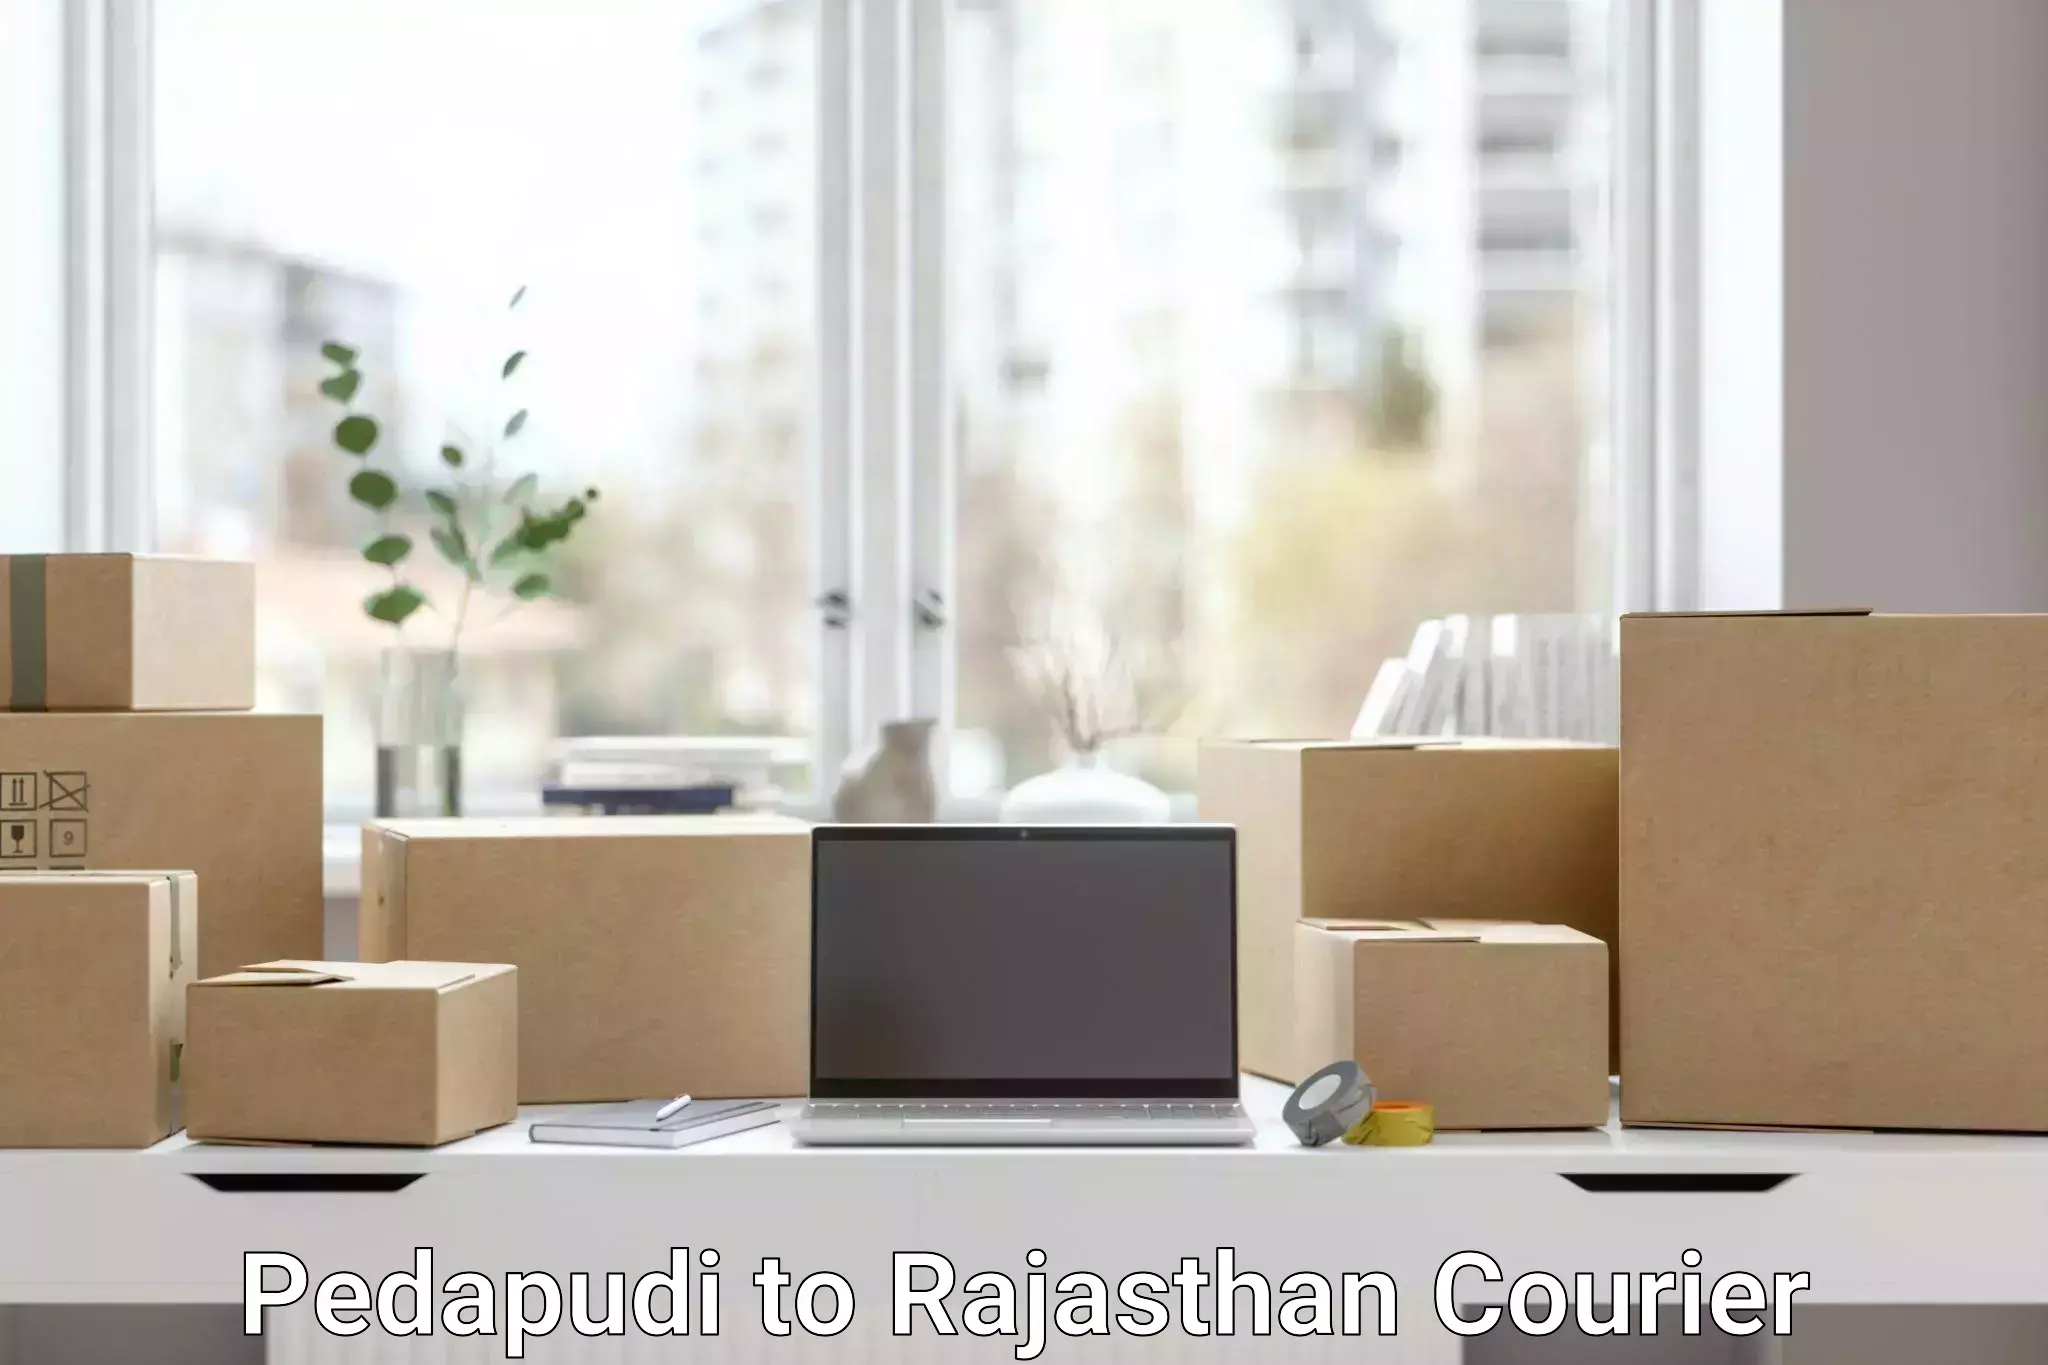 Package delivery network Pedapudi to Rajasthan